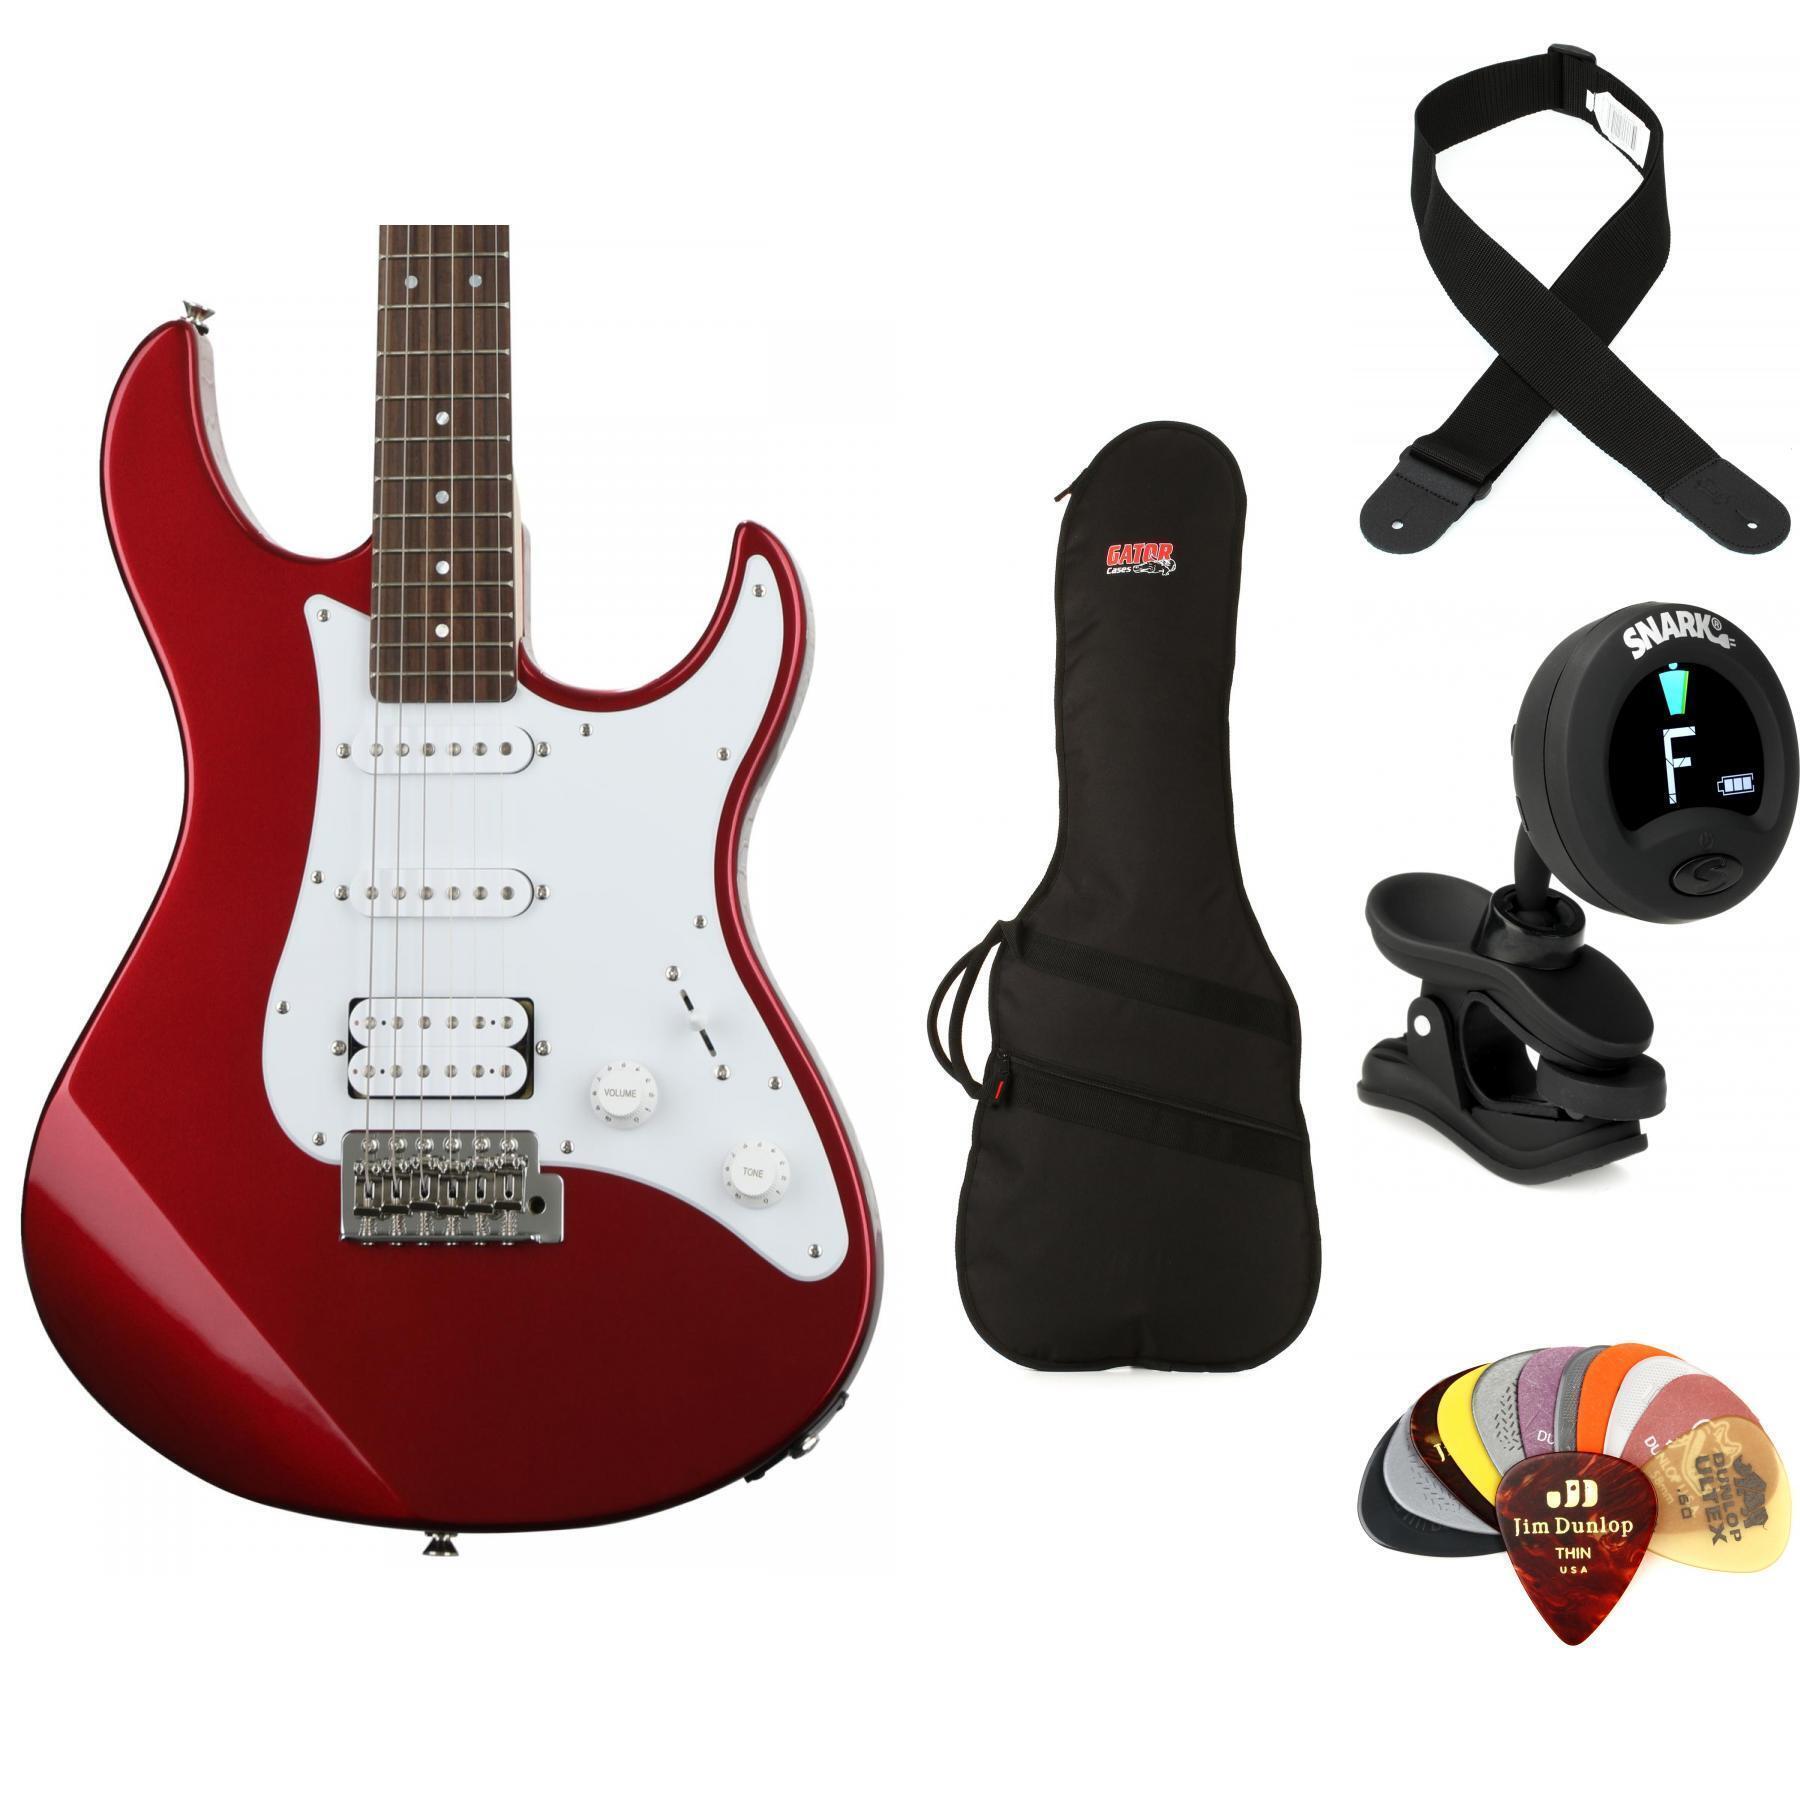 Yamaha PAC012 Pacifica Electric Guitar - Metallic Red | Sweetwater